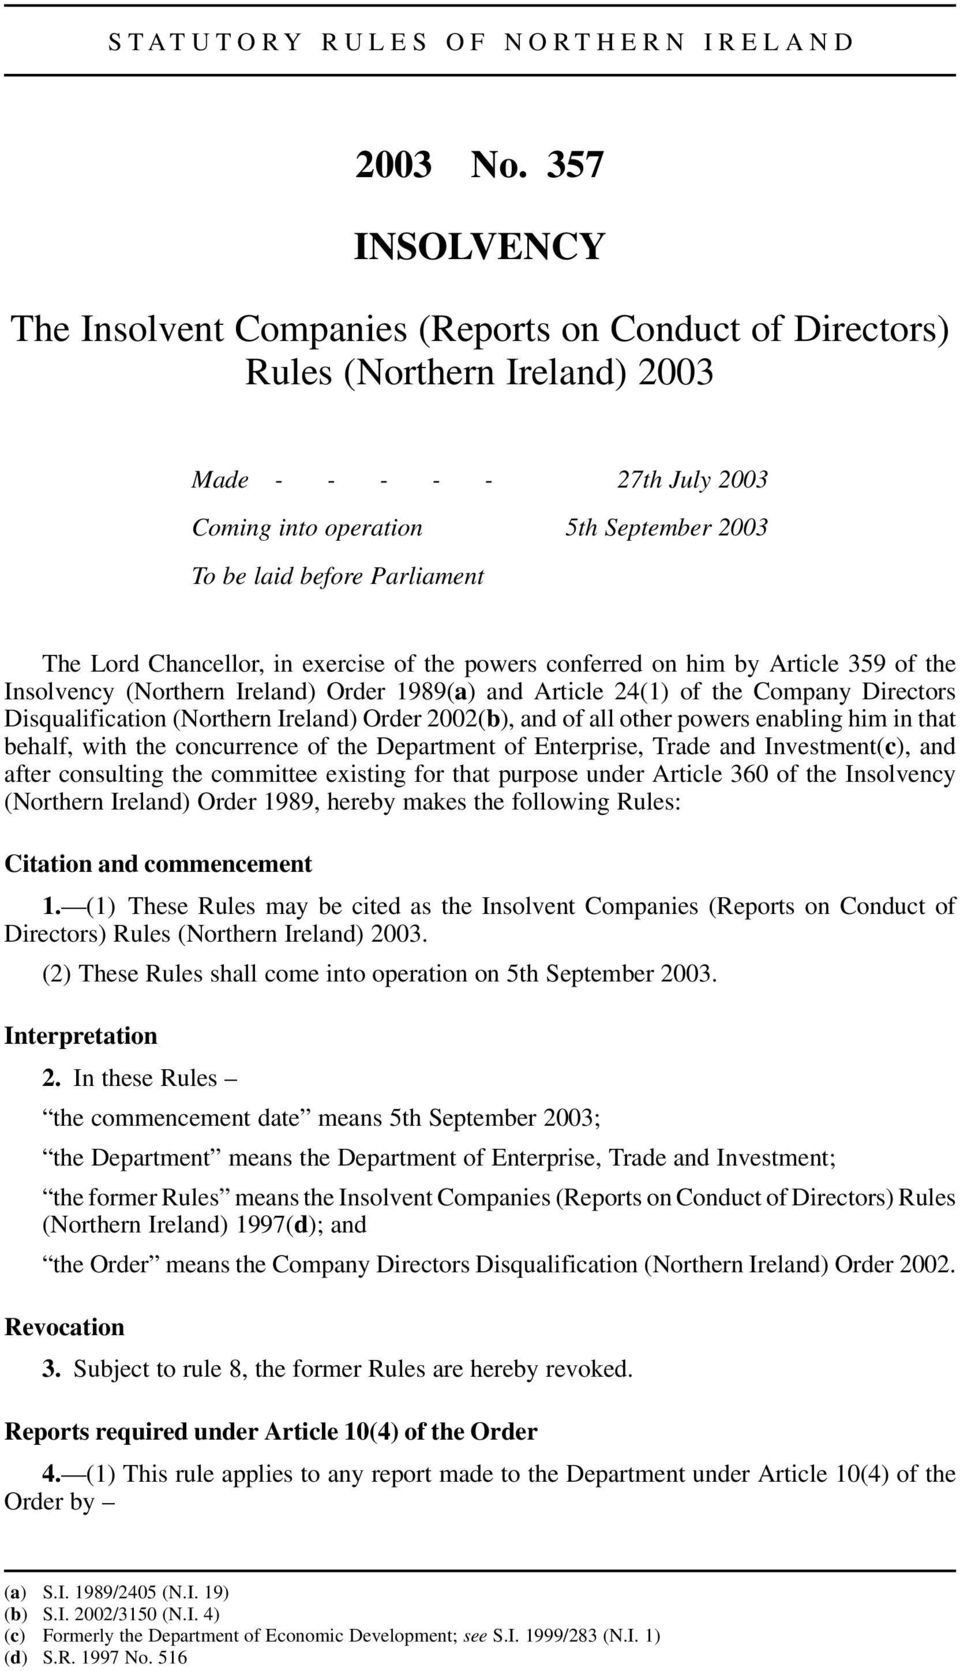 Parliament The Lord Chancellor, in exercise of the powers conferred on him by Article 359 of the Insolvency (Northern Ireland) Order 1989(a) and Article 24(1) of the Company Directors